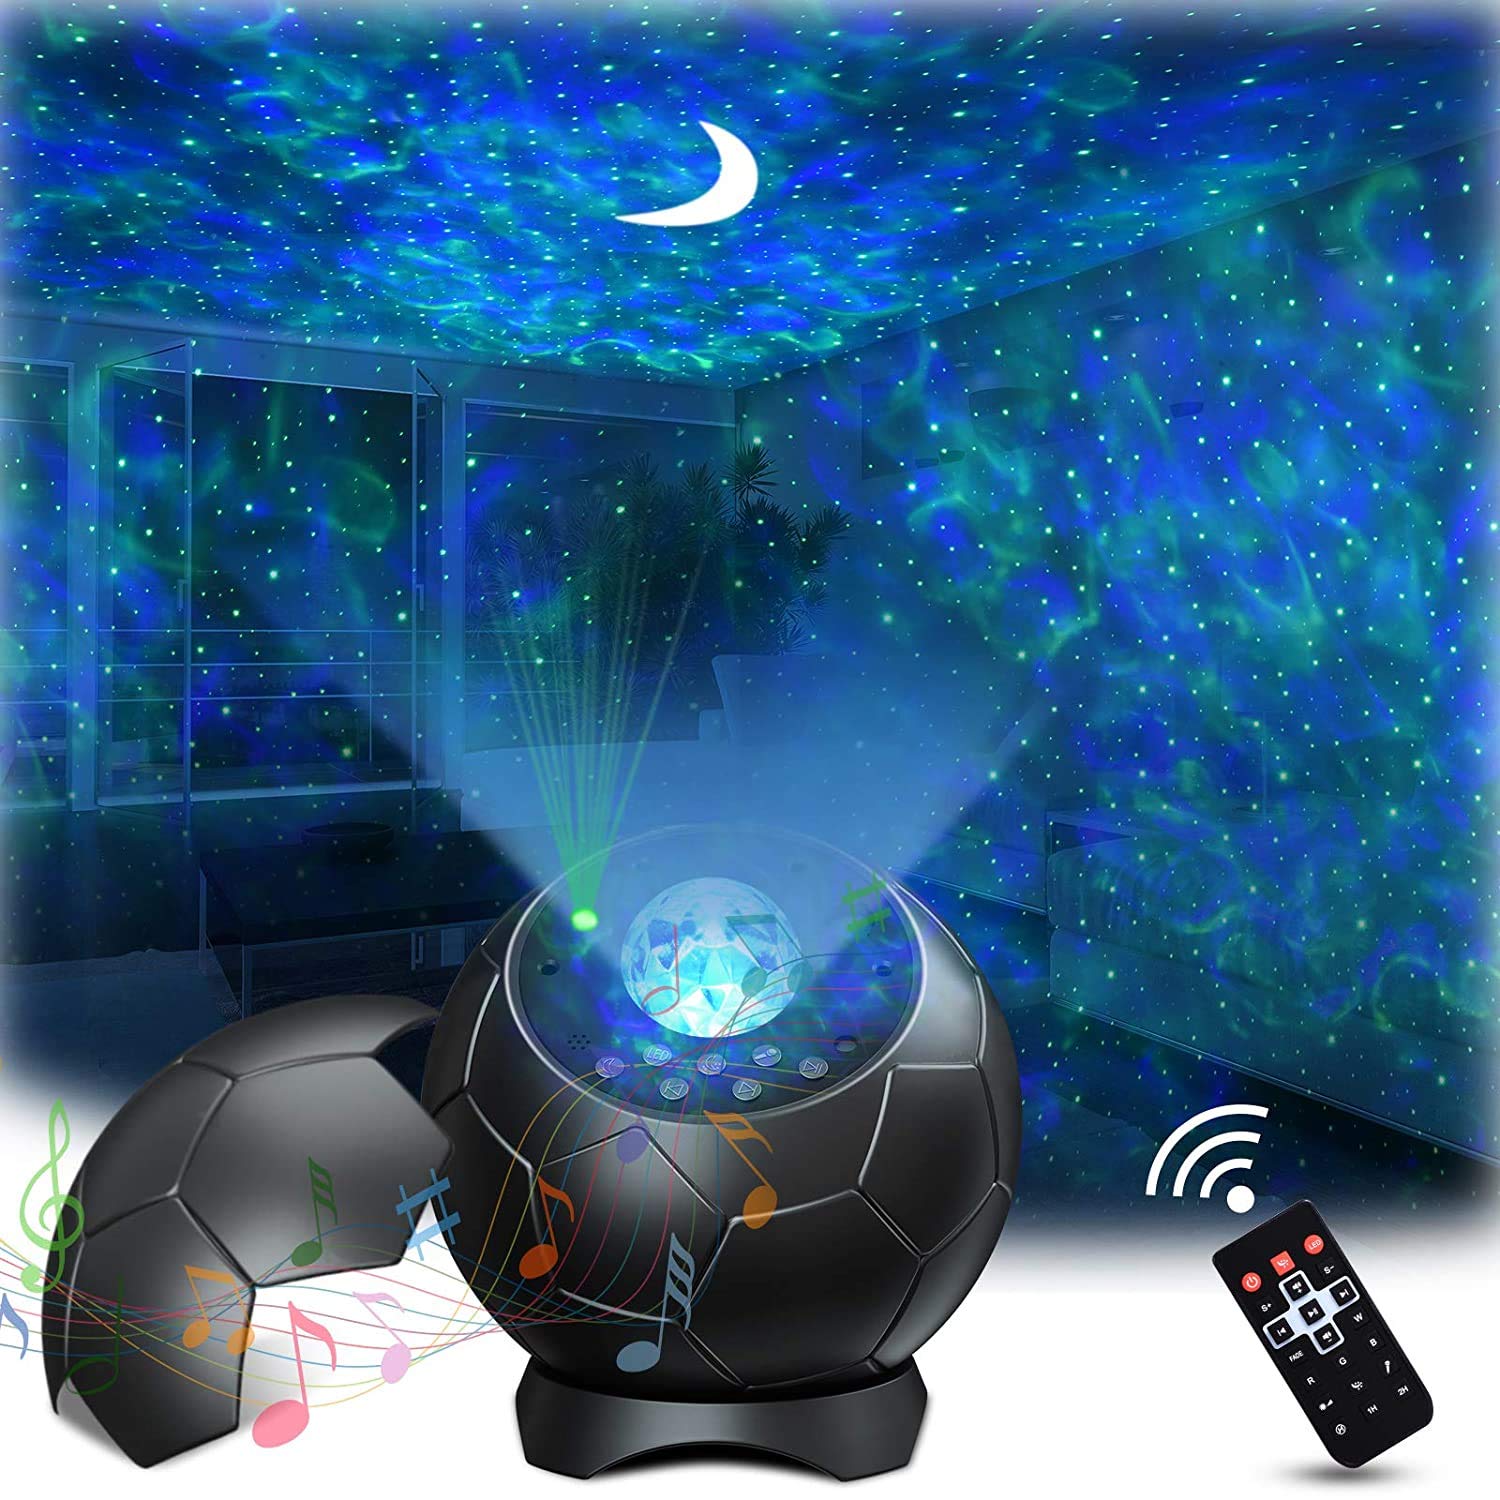 Lupantte Light Projector, Night Light Projector with Remote & Voice Control & Timer & Music Speaker, Star Projector Sound/Brightness/Speed Adjustable, 21 Colors and 72 Effects, Room Decor/Gift/Party